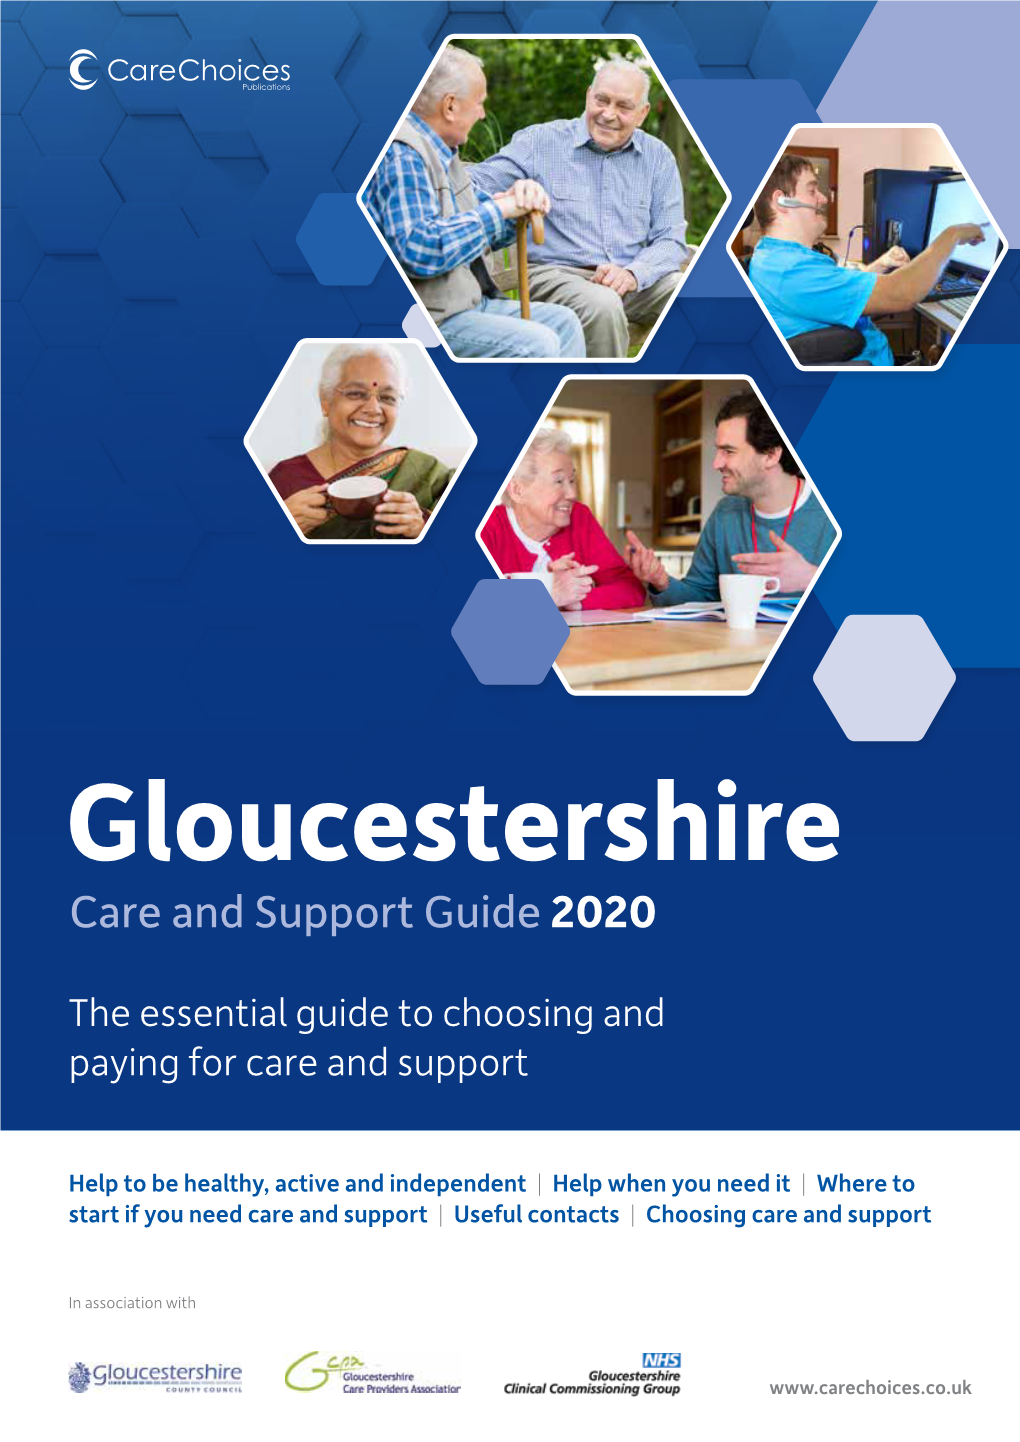 Gloucestershire Care and Support Guide 2020